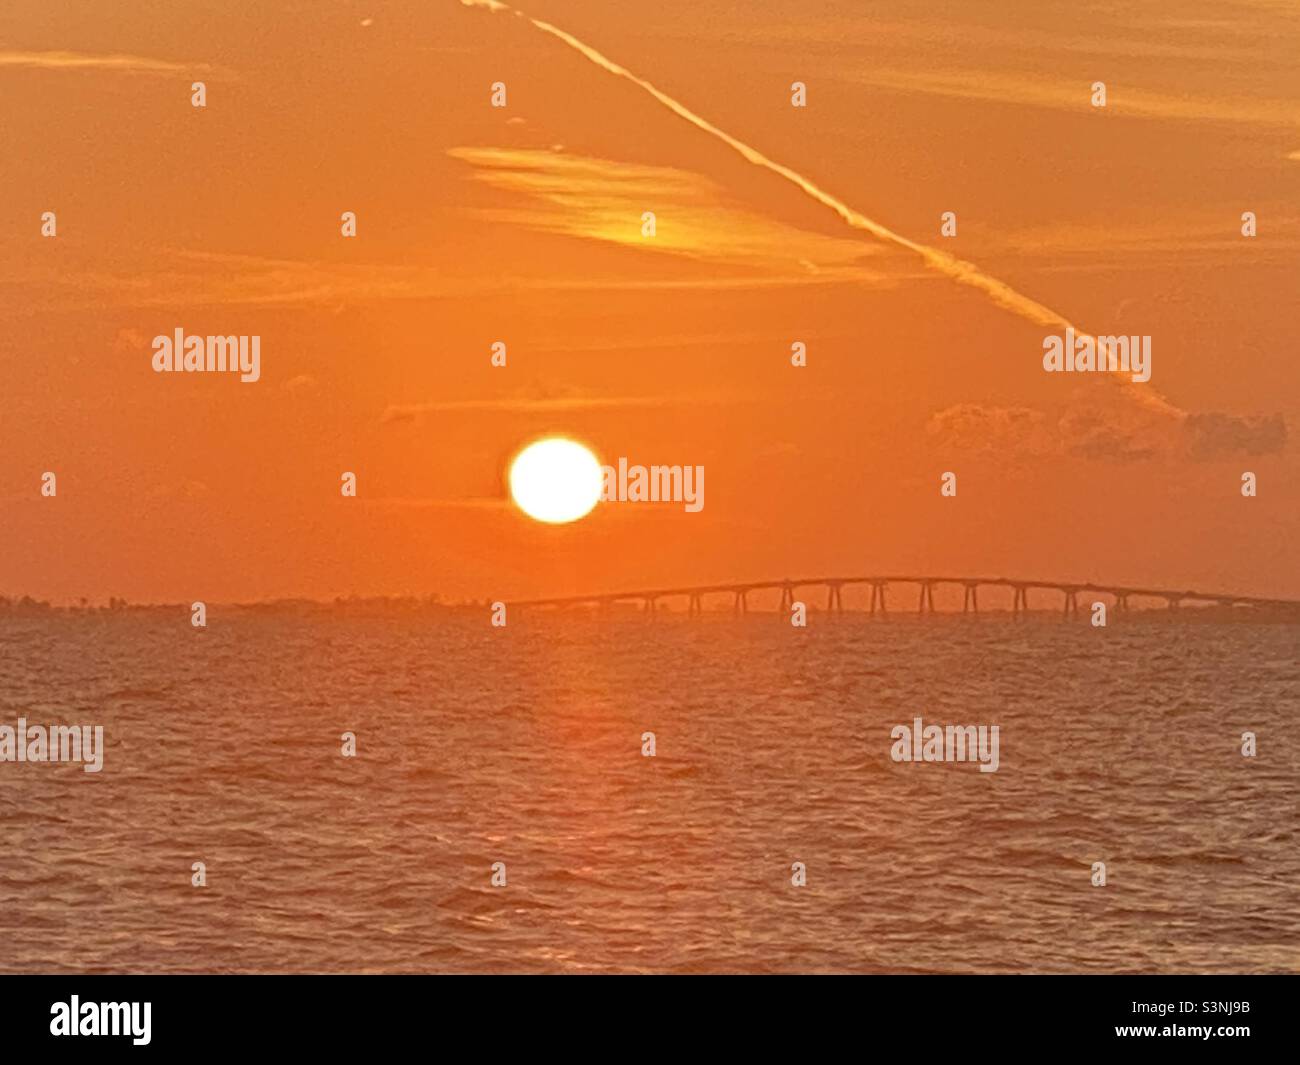 Brilliant orange sky with the huge sun going down over a bridge and coastline in ft Myers beach, Florida, view from a boat on the water, silhouette sunset Stock Photo